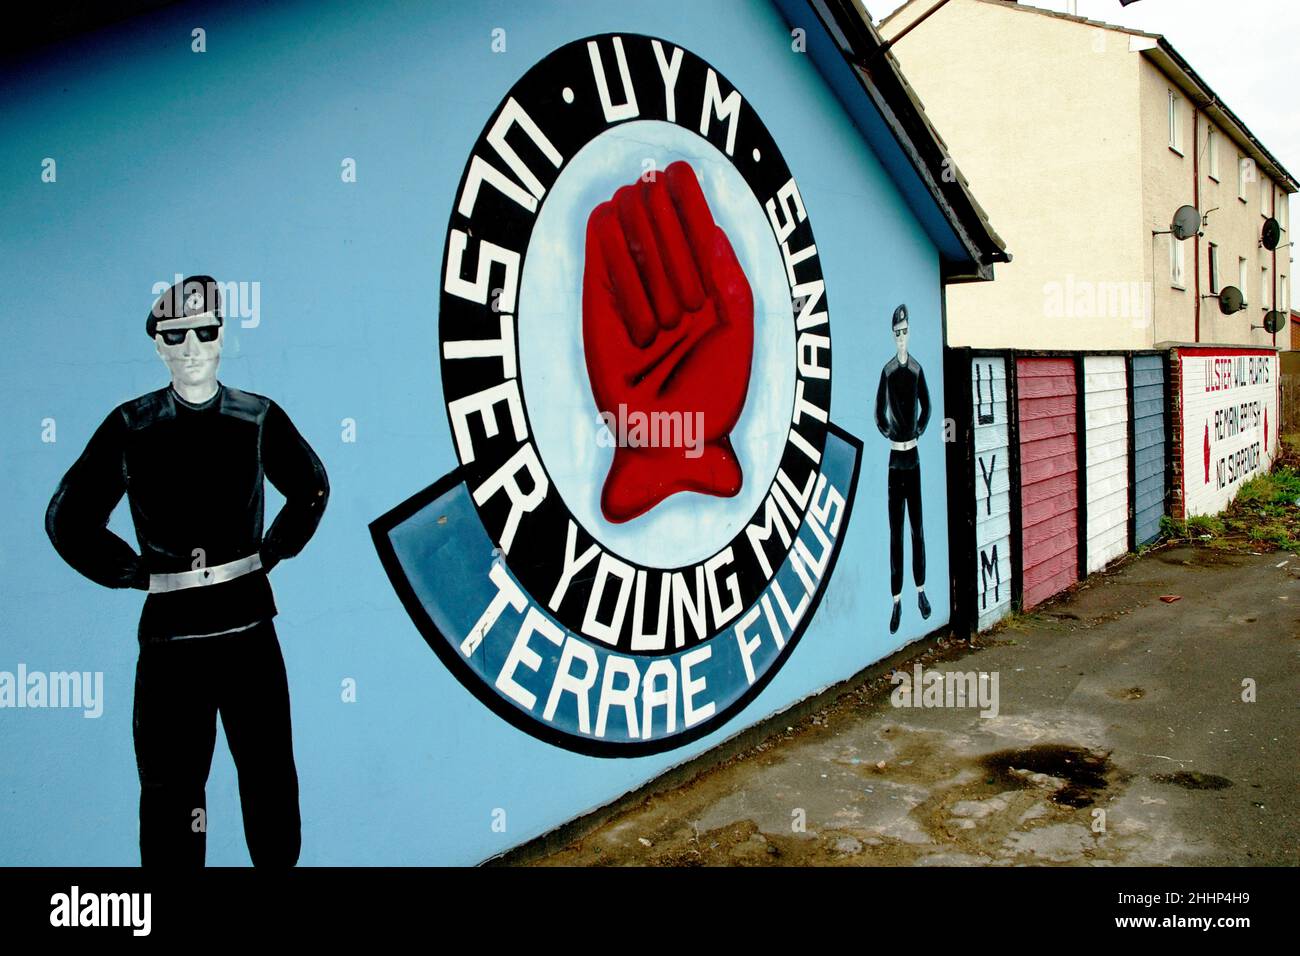 North Ireland. Ulster. Belfast. In the protestant district, Shankill road is famous for its murals in honor of the british troops. Stock Photo